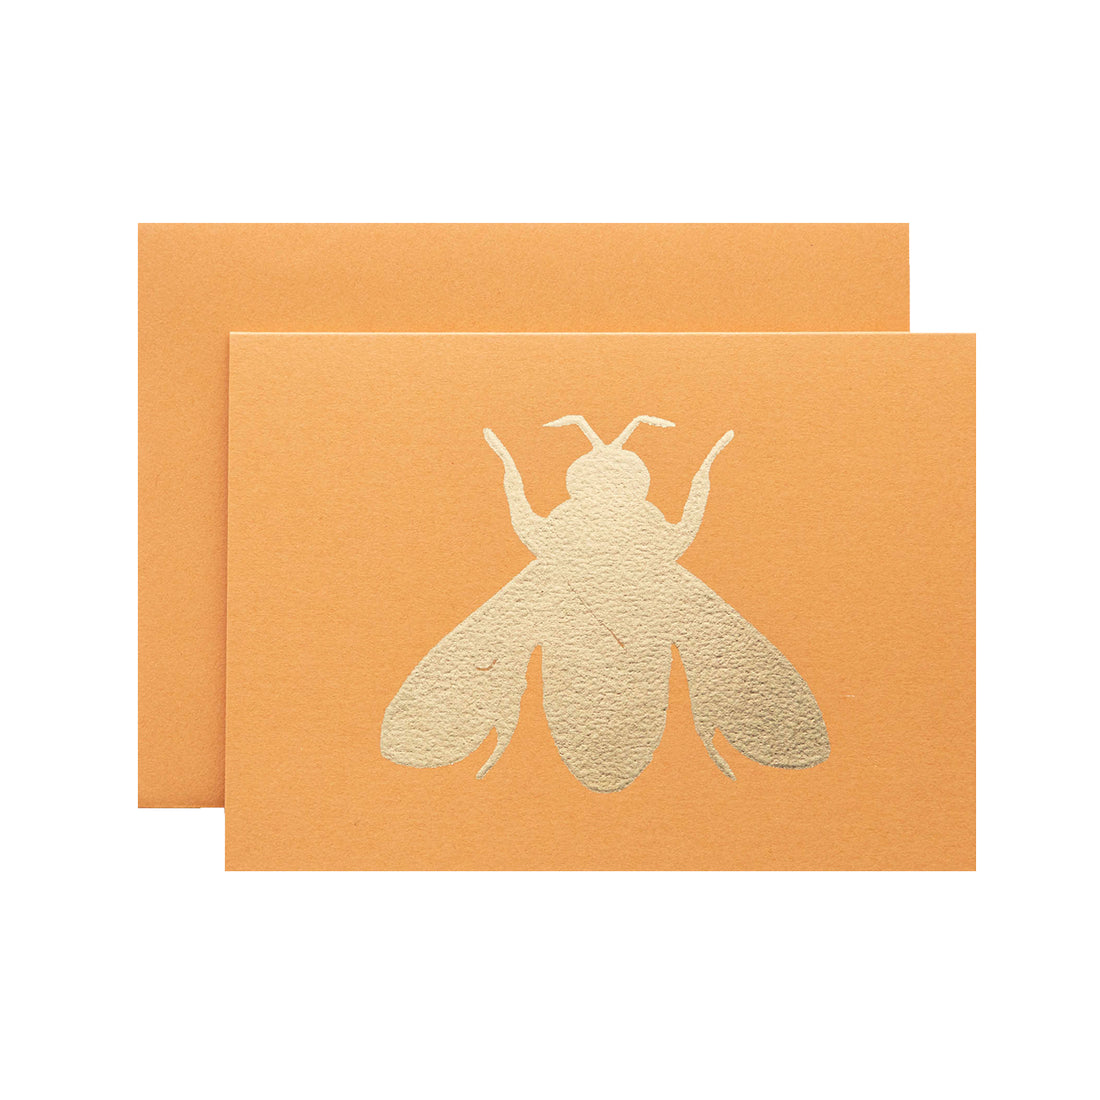 A bright orange card featuring the silhouette of a bee in solid gold leaf.